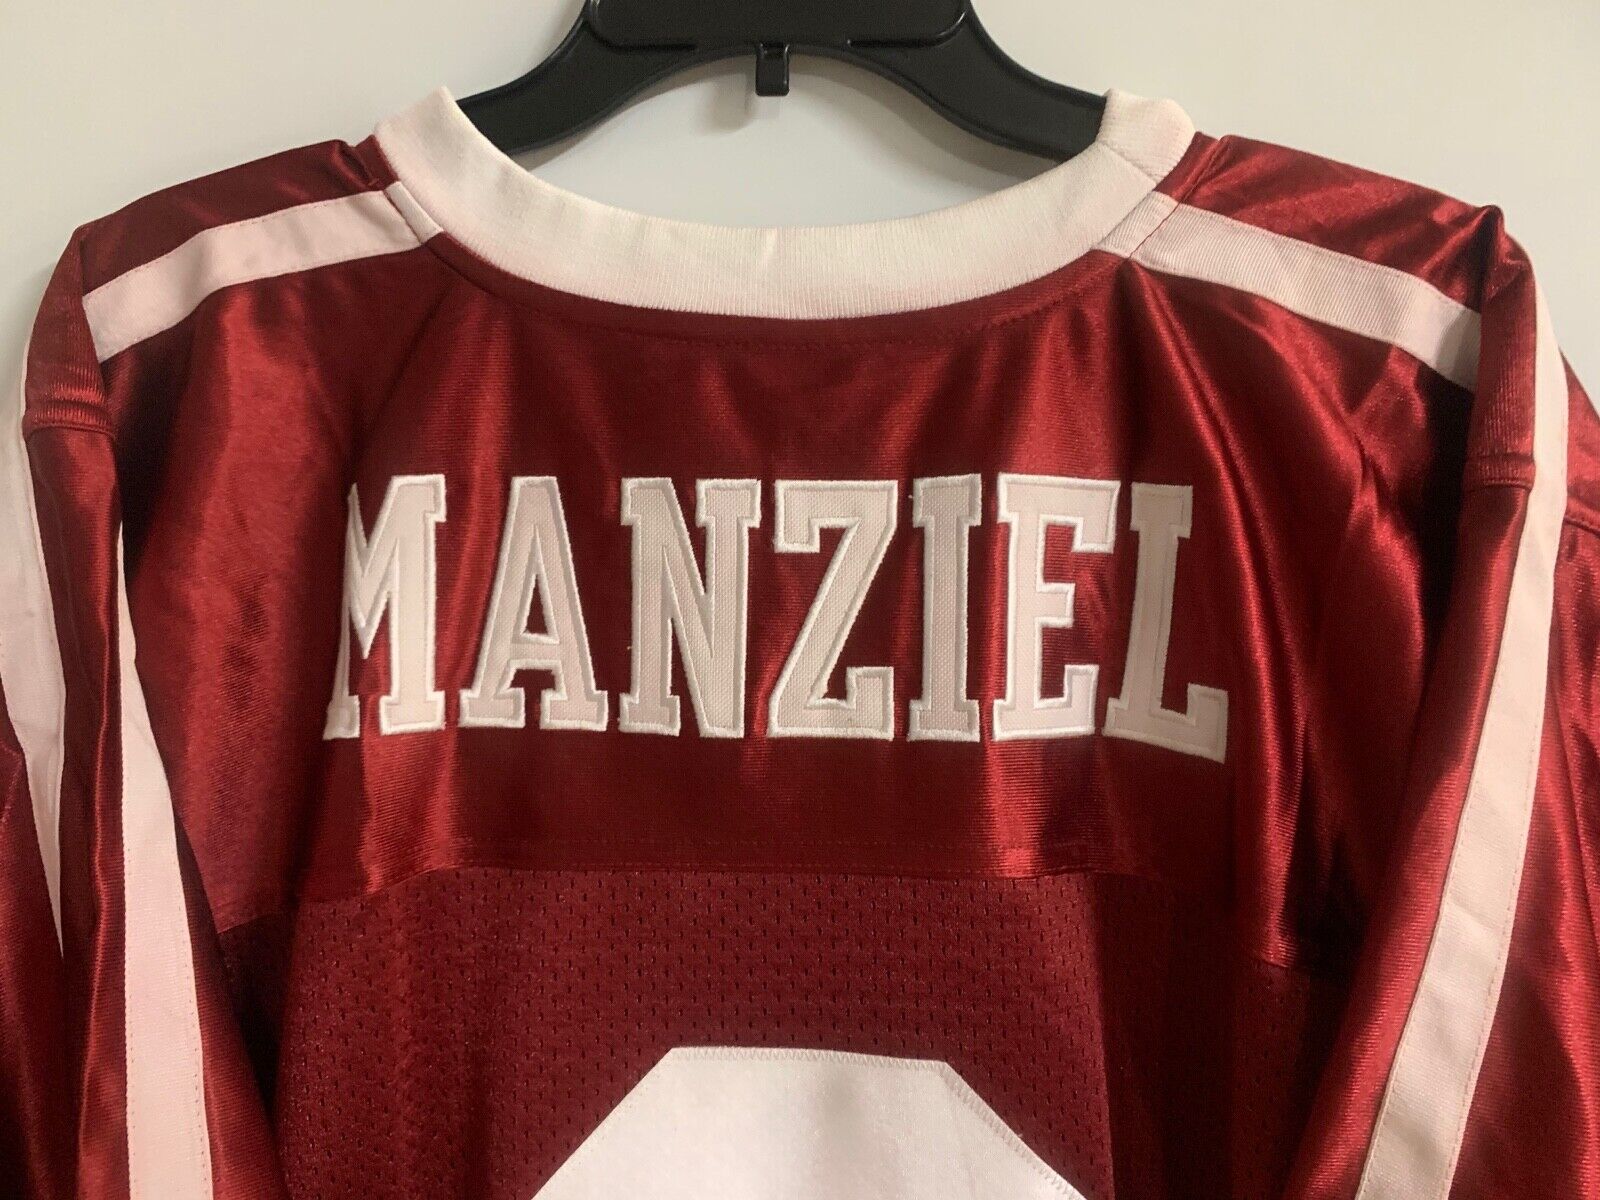 Johnny Manziel Texas A&M Autographed Signed Custom Jersey with PSA Certificate